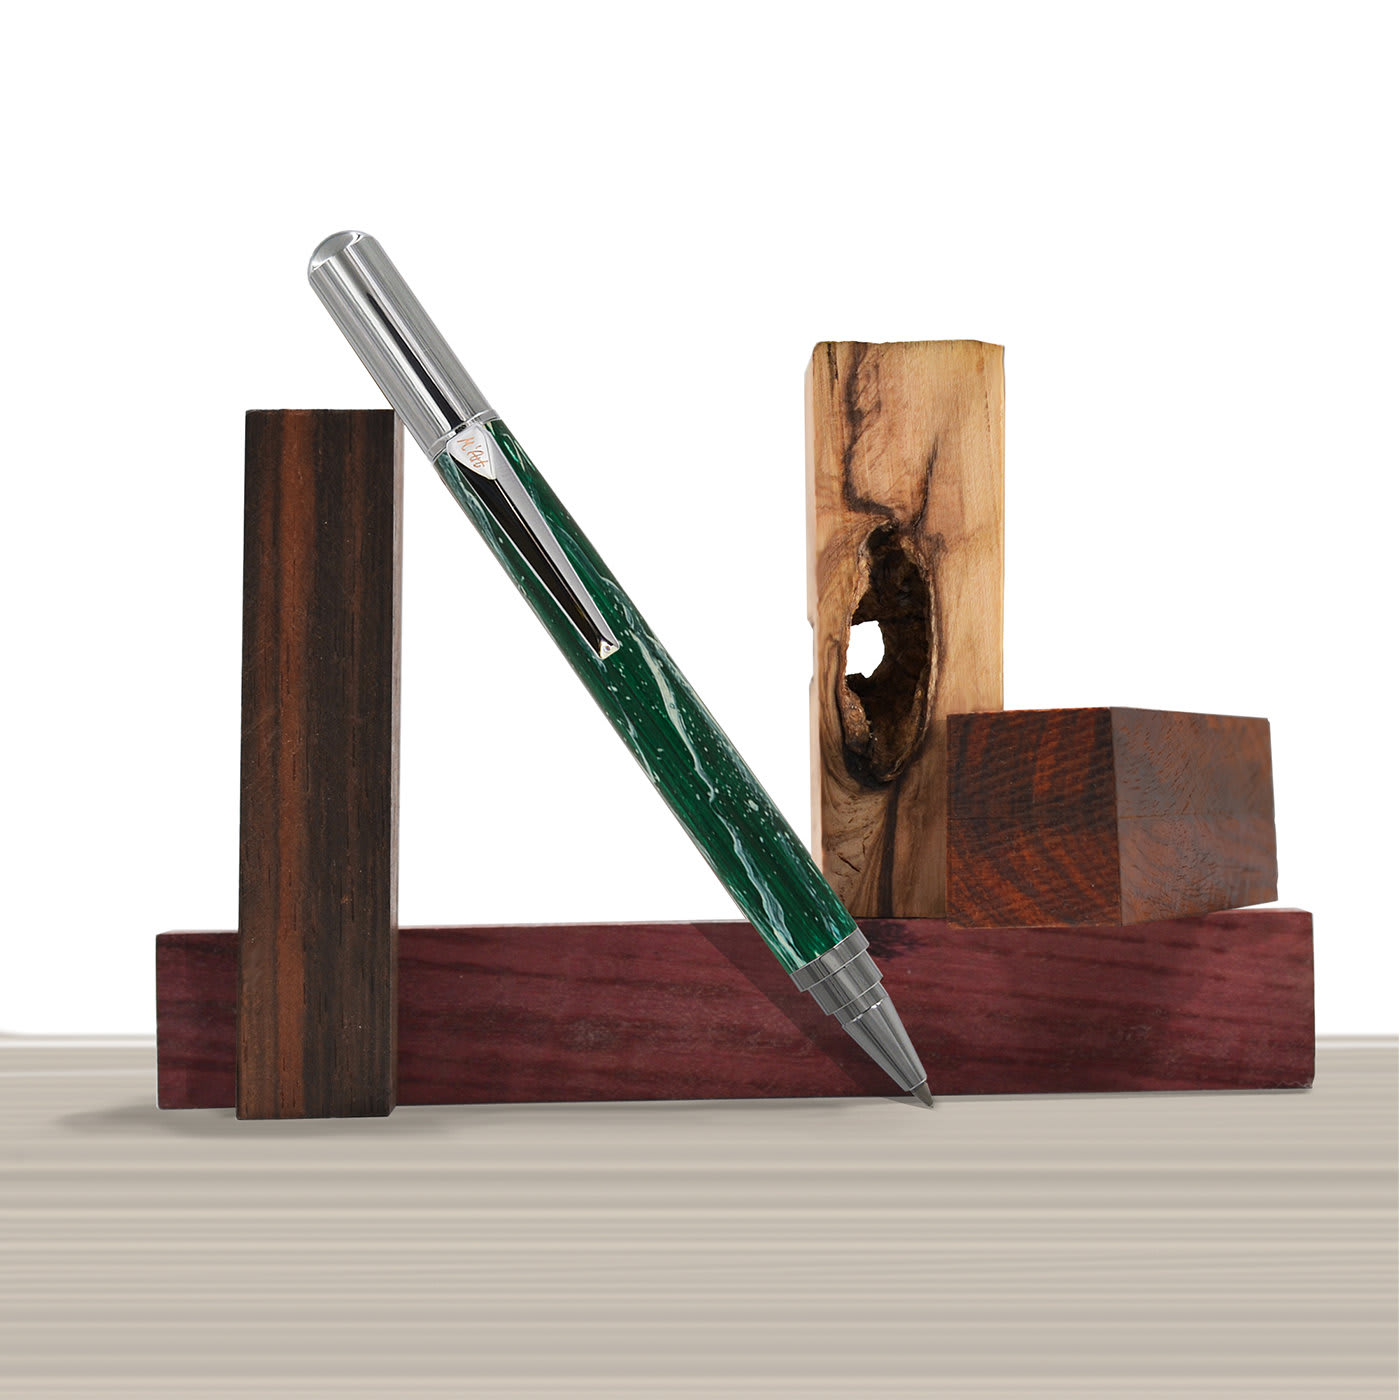 Matera Marbled Green Roller Pen in Olive Wood - M'Art